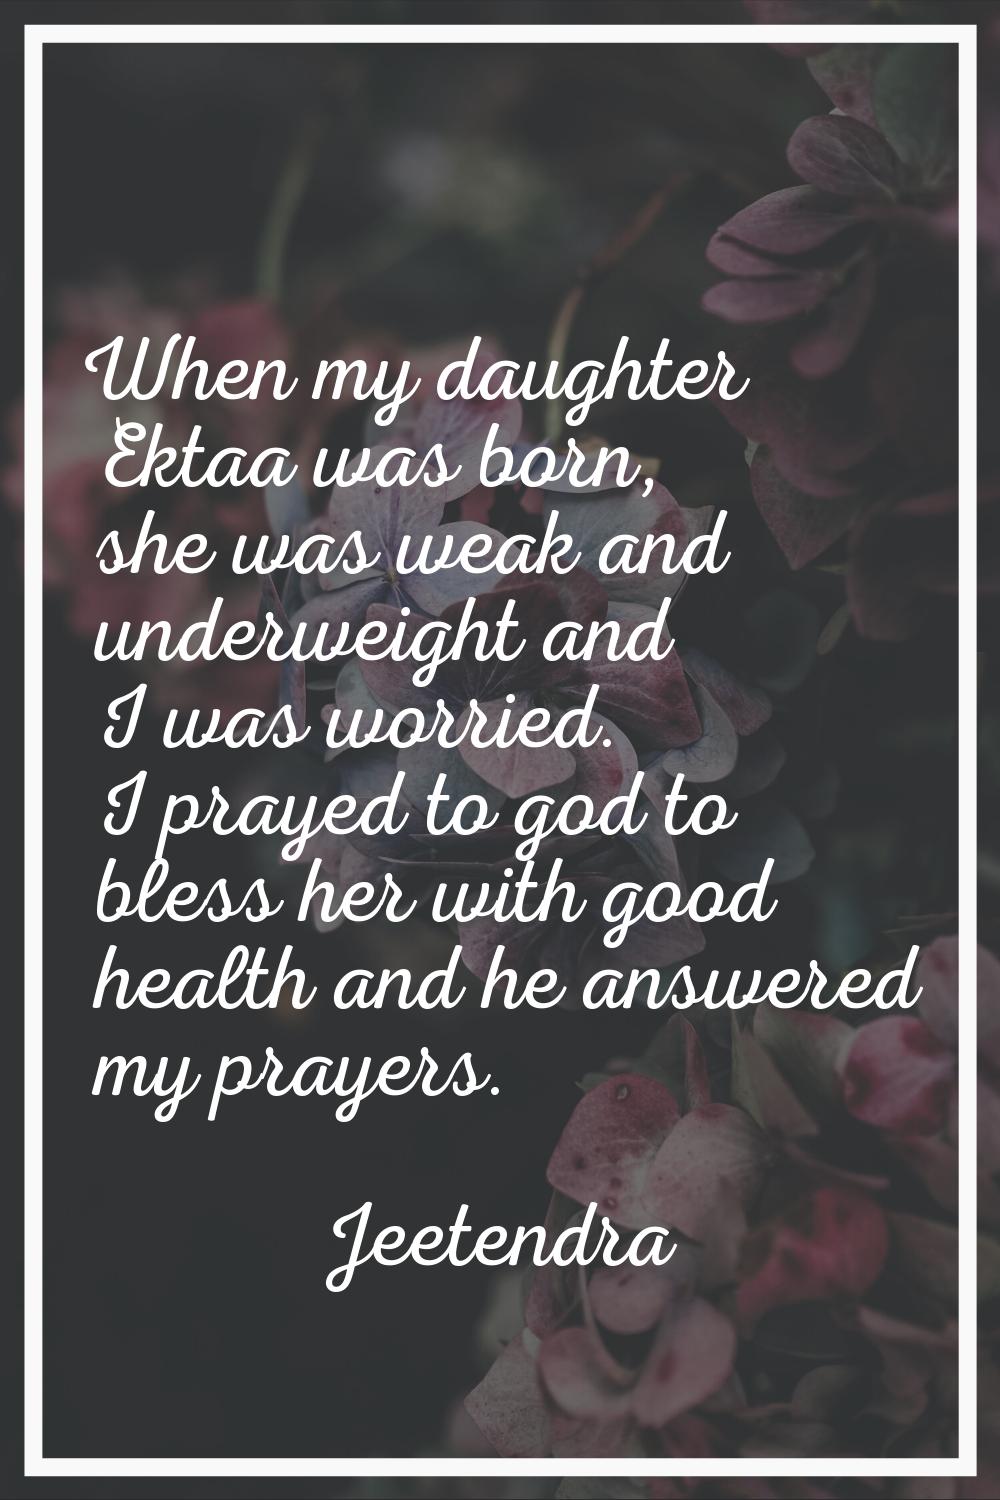 When my daughter Ektaa was born, she was weak and underweight and I was worried. I prayed to god to